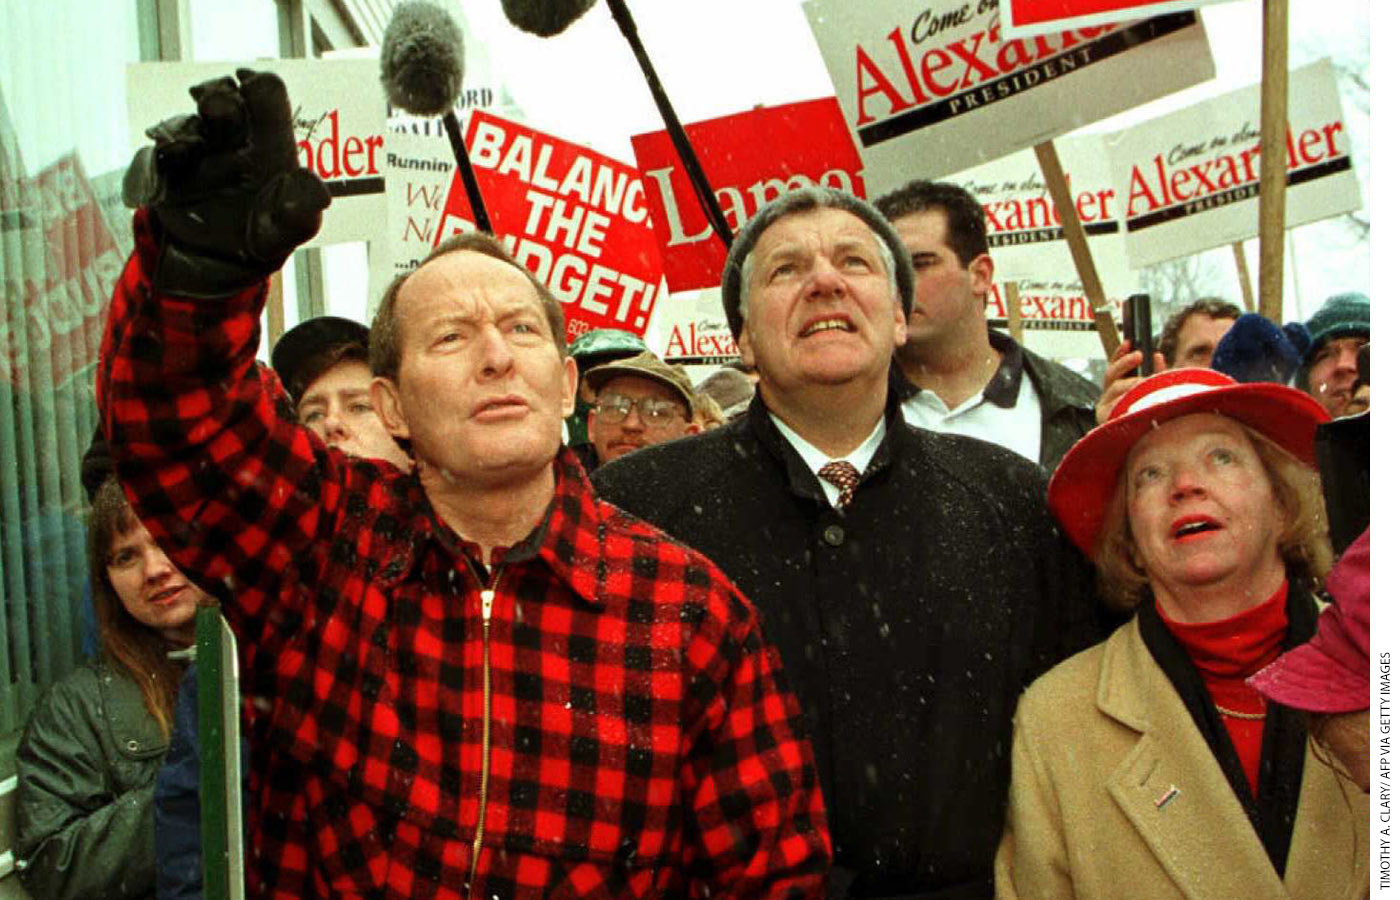 Alexander waves to supporters in Milford, New Hampshire, during his presidential campaign, February 14, 1996.